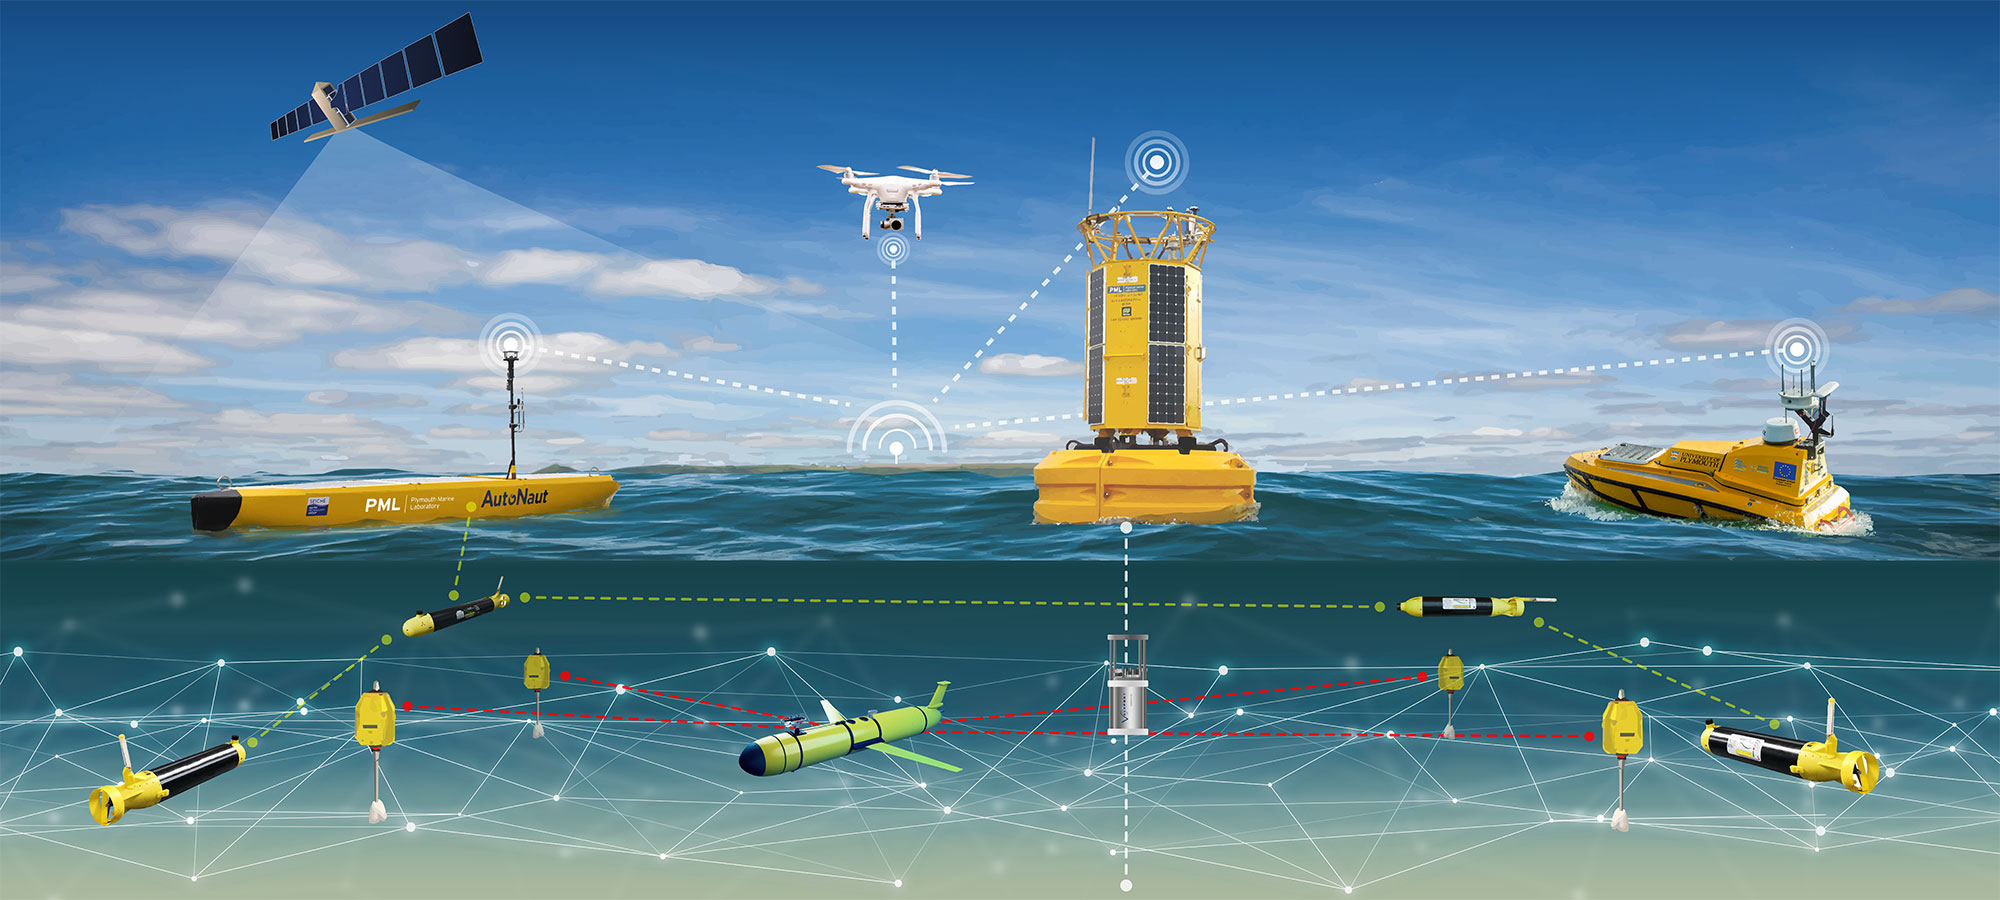 Illustration showing above and below water with various elements of smart sound technology - Including drone, surface vessels, underwater gliders with an underwater plexus showing modelling of the sea bed